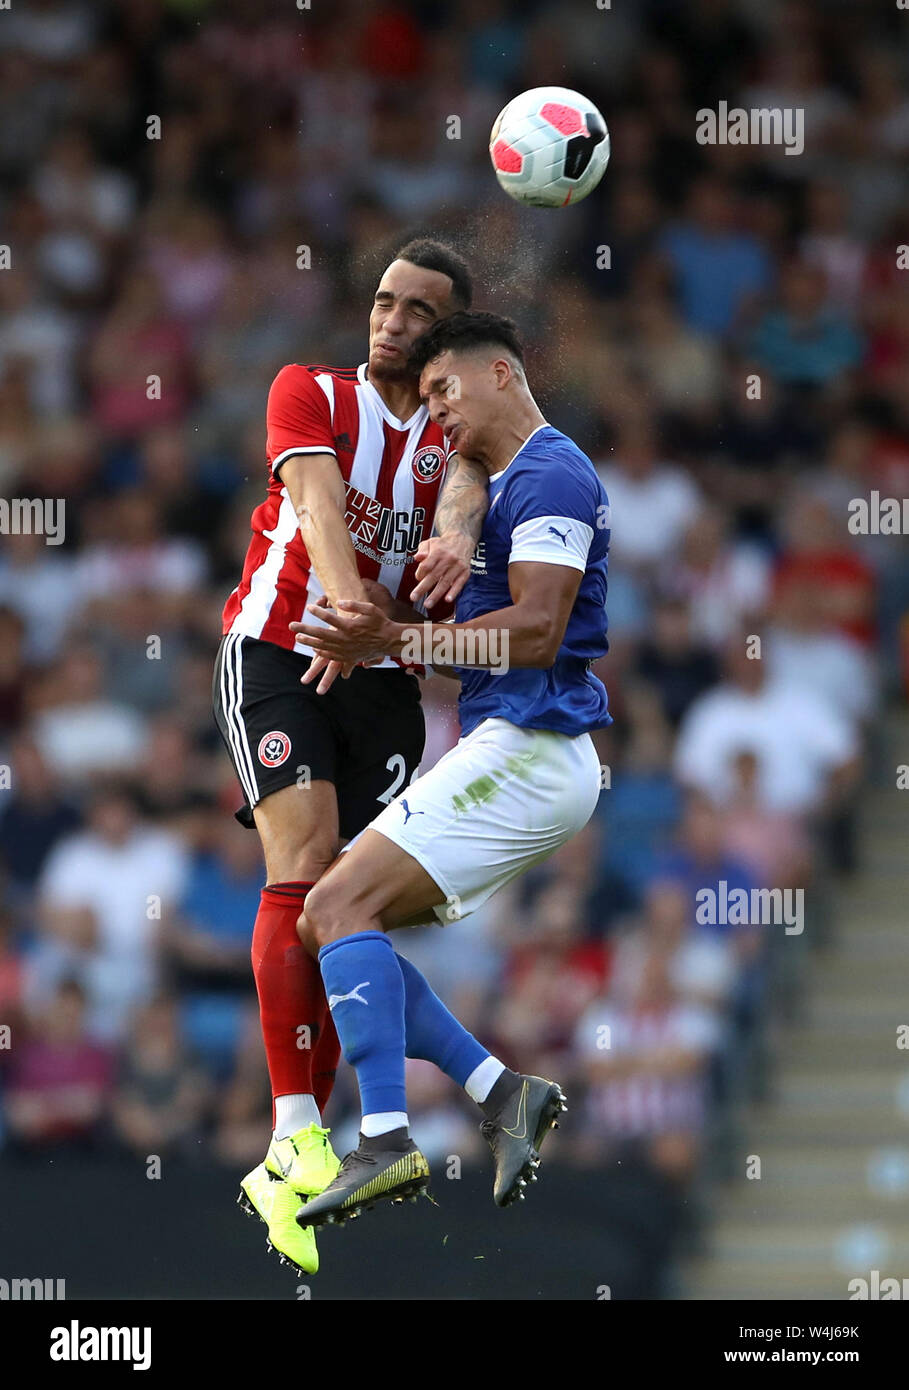 Sheffield United's Kean Bryan (left) and Chesterfield's Josef Yarney battle for the ball during the pre-season friendly match at the Proact Stadium, Chesterfield. Stock Photo